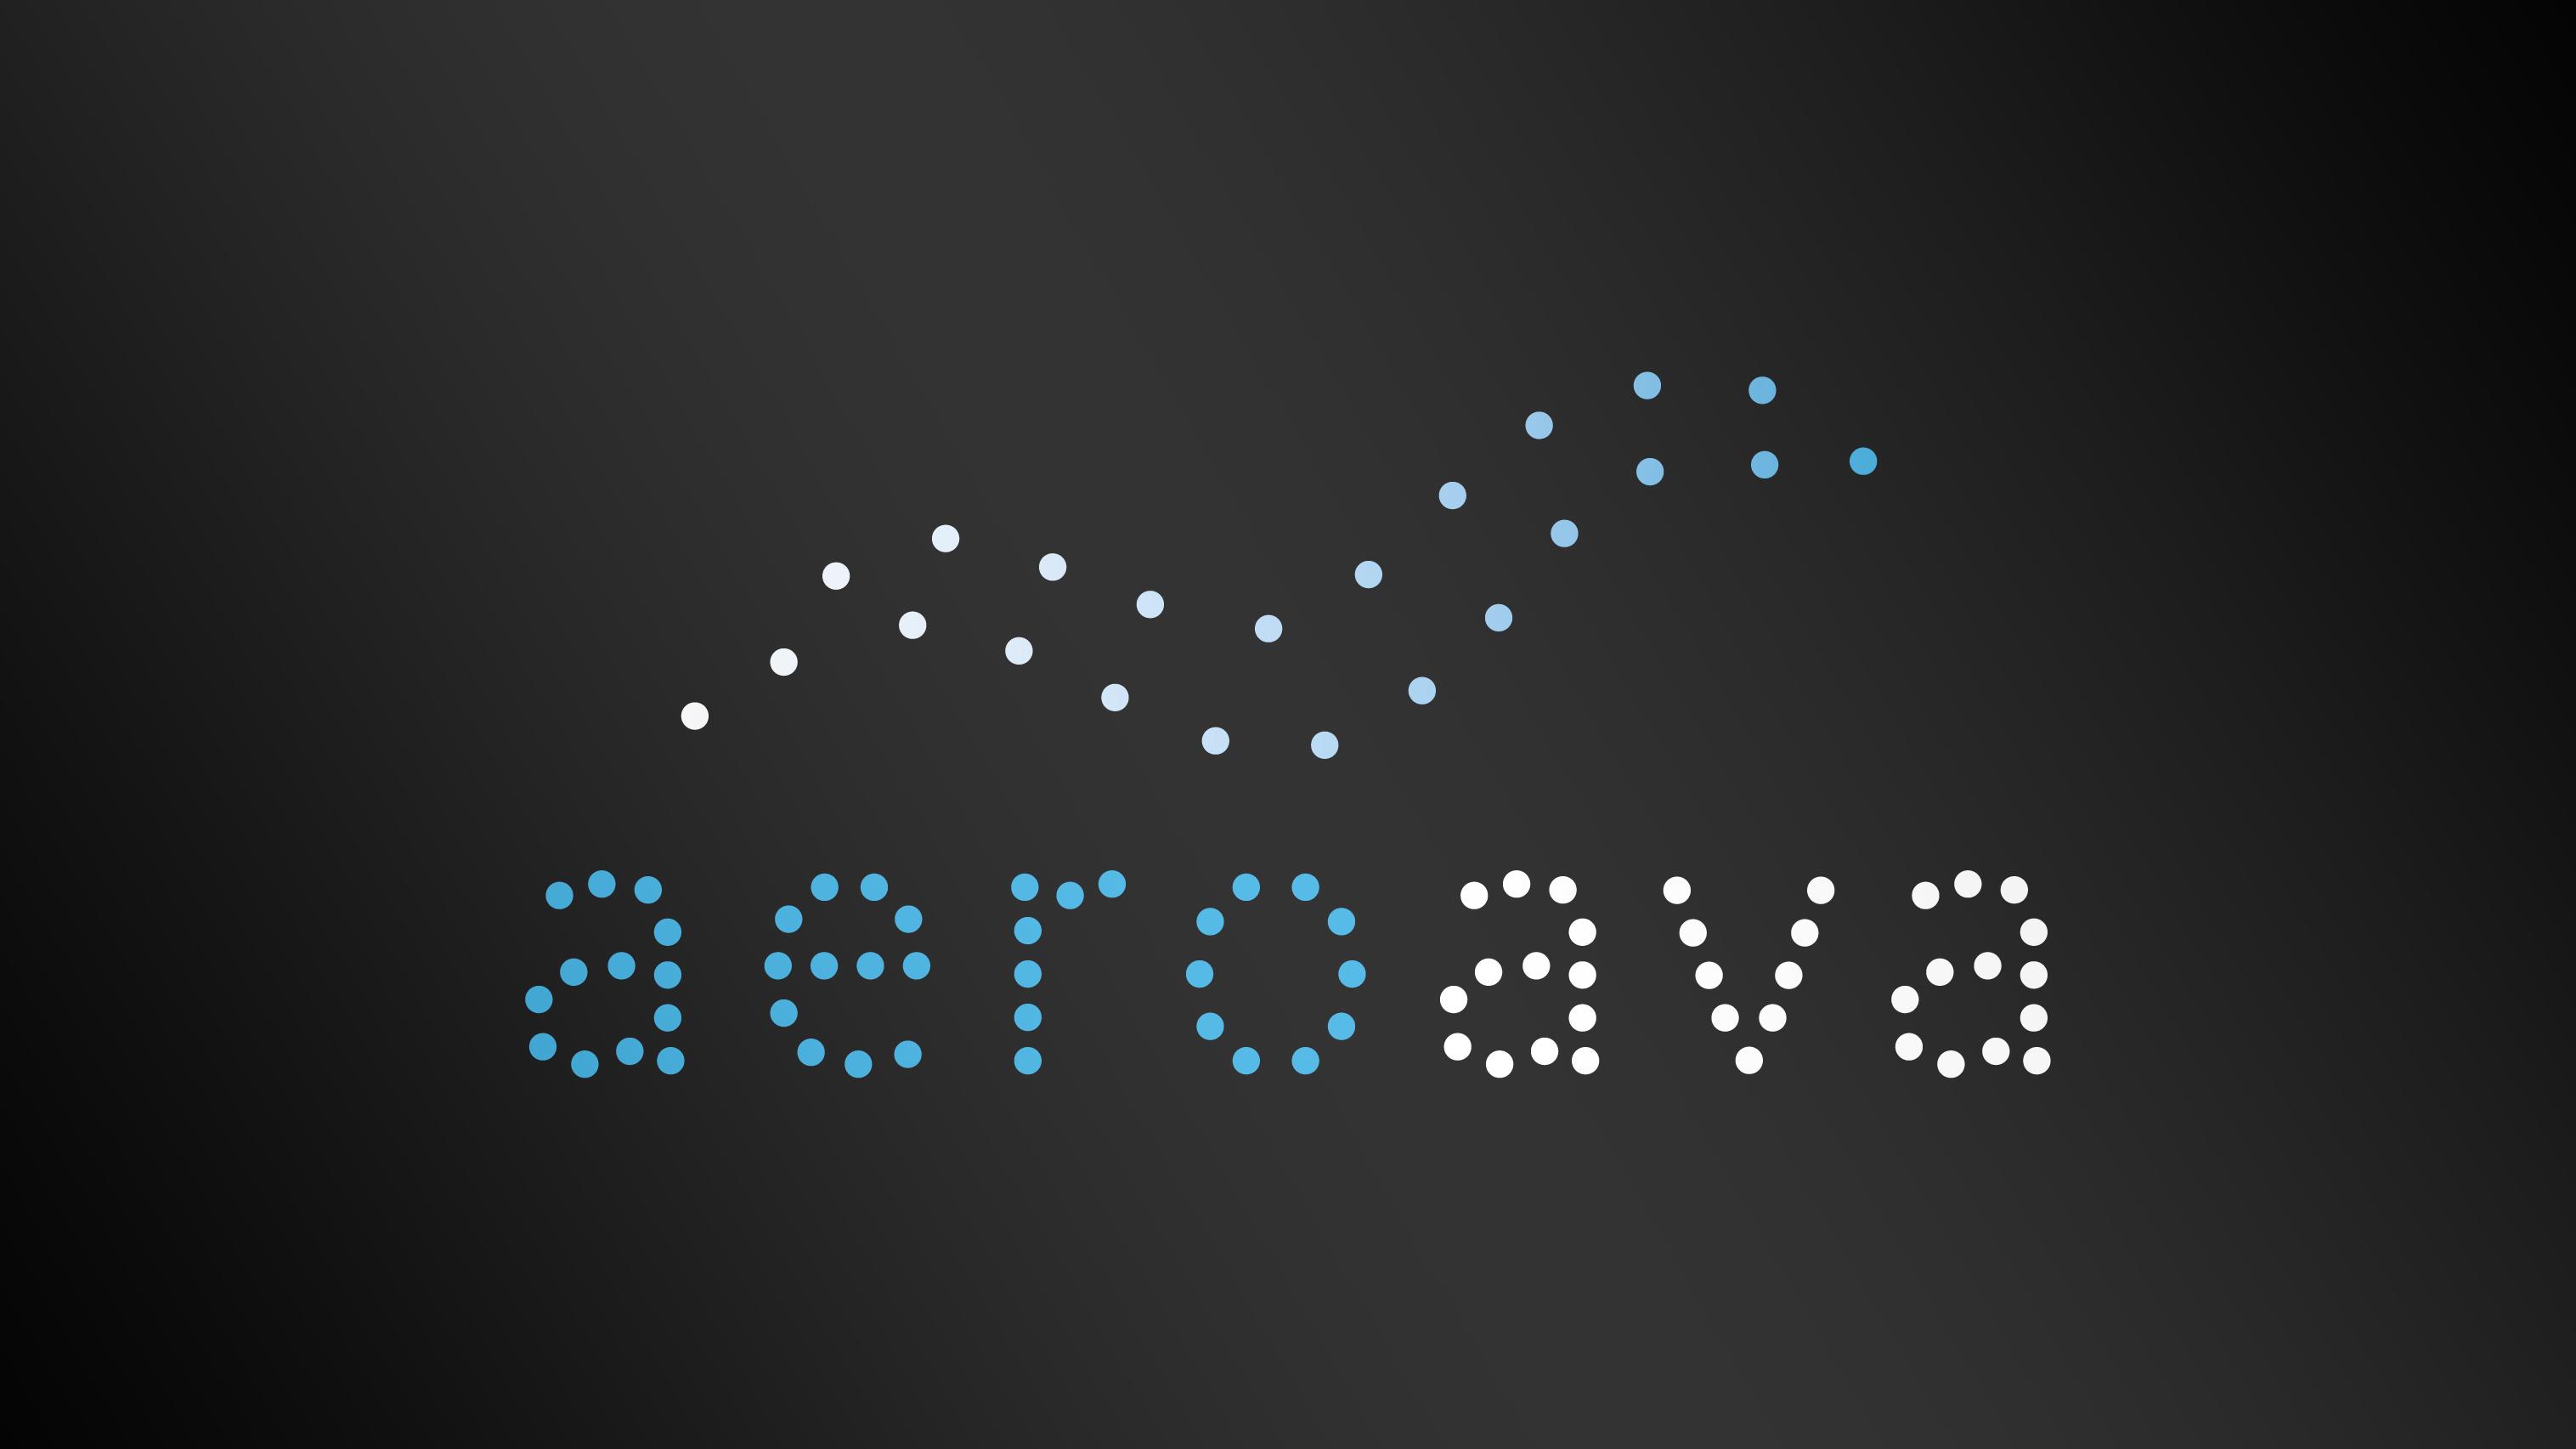 A simple logo image using just 100 drones